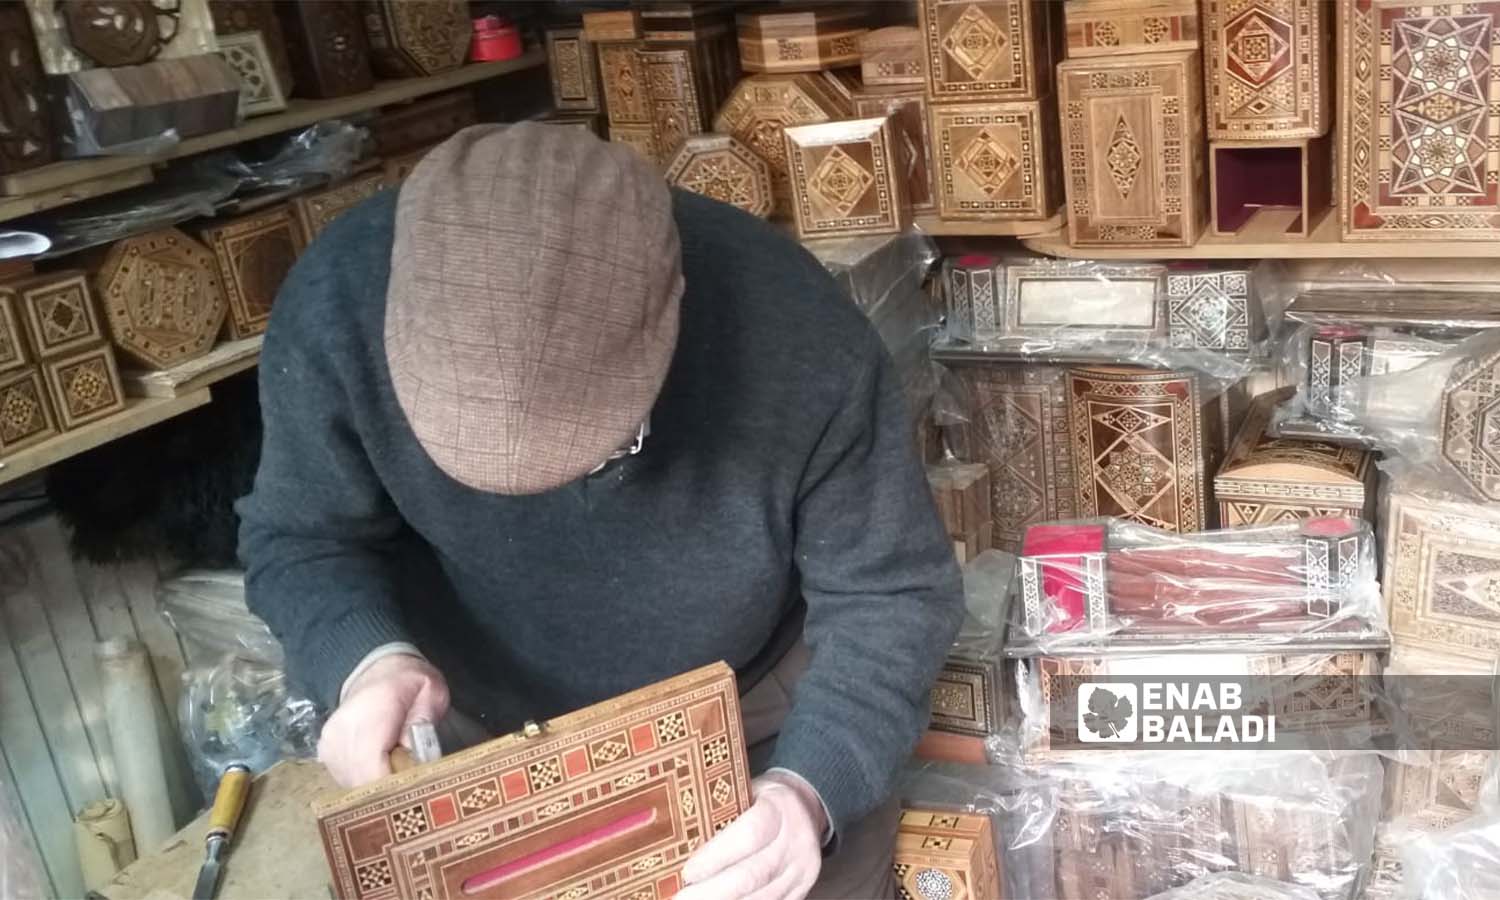 A mosaic craftsman working in Midhat Pasha Souq in the Old City of Damascus (Enab Baladi-Hassan Hassan)